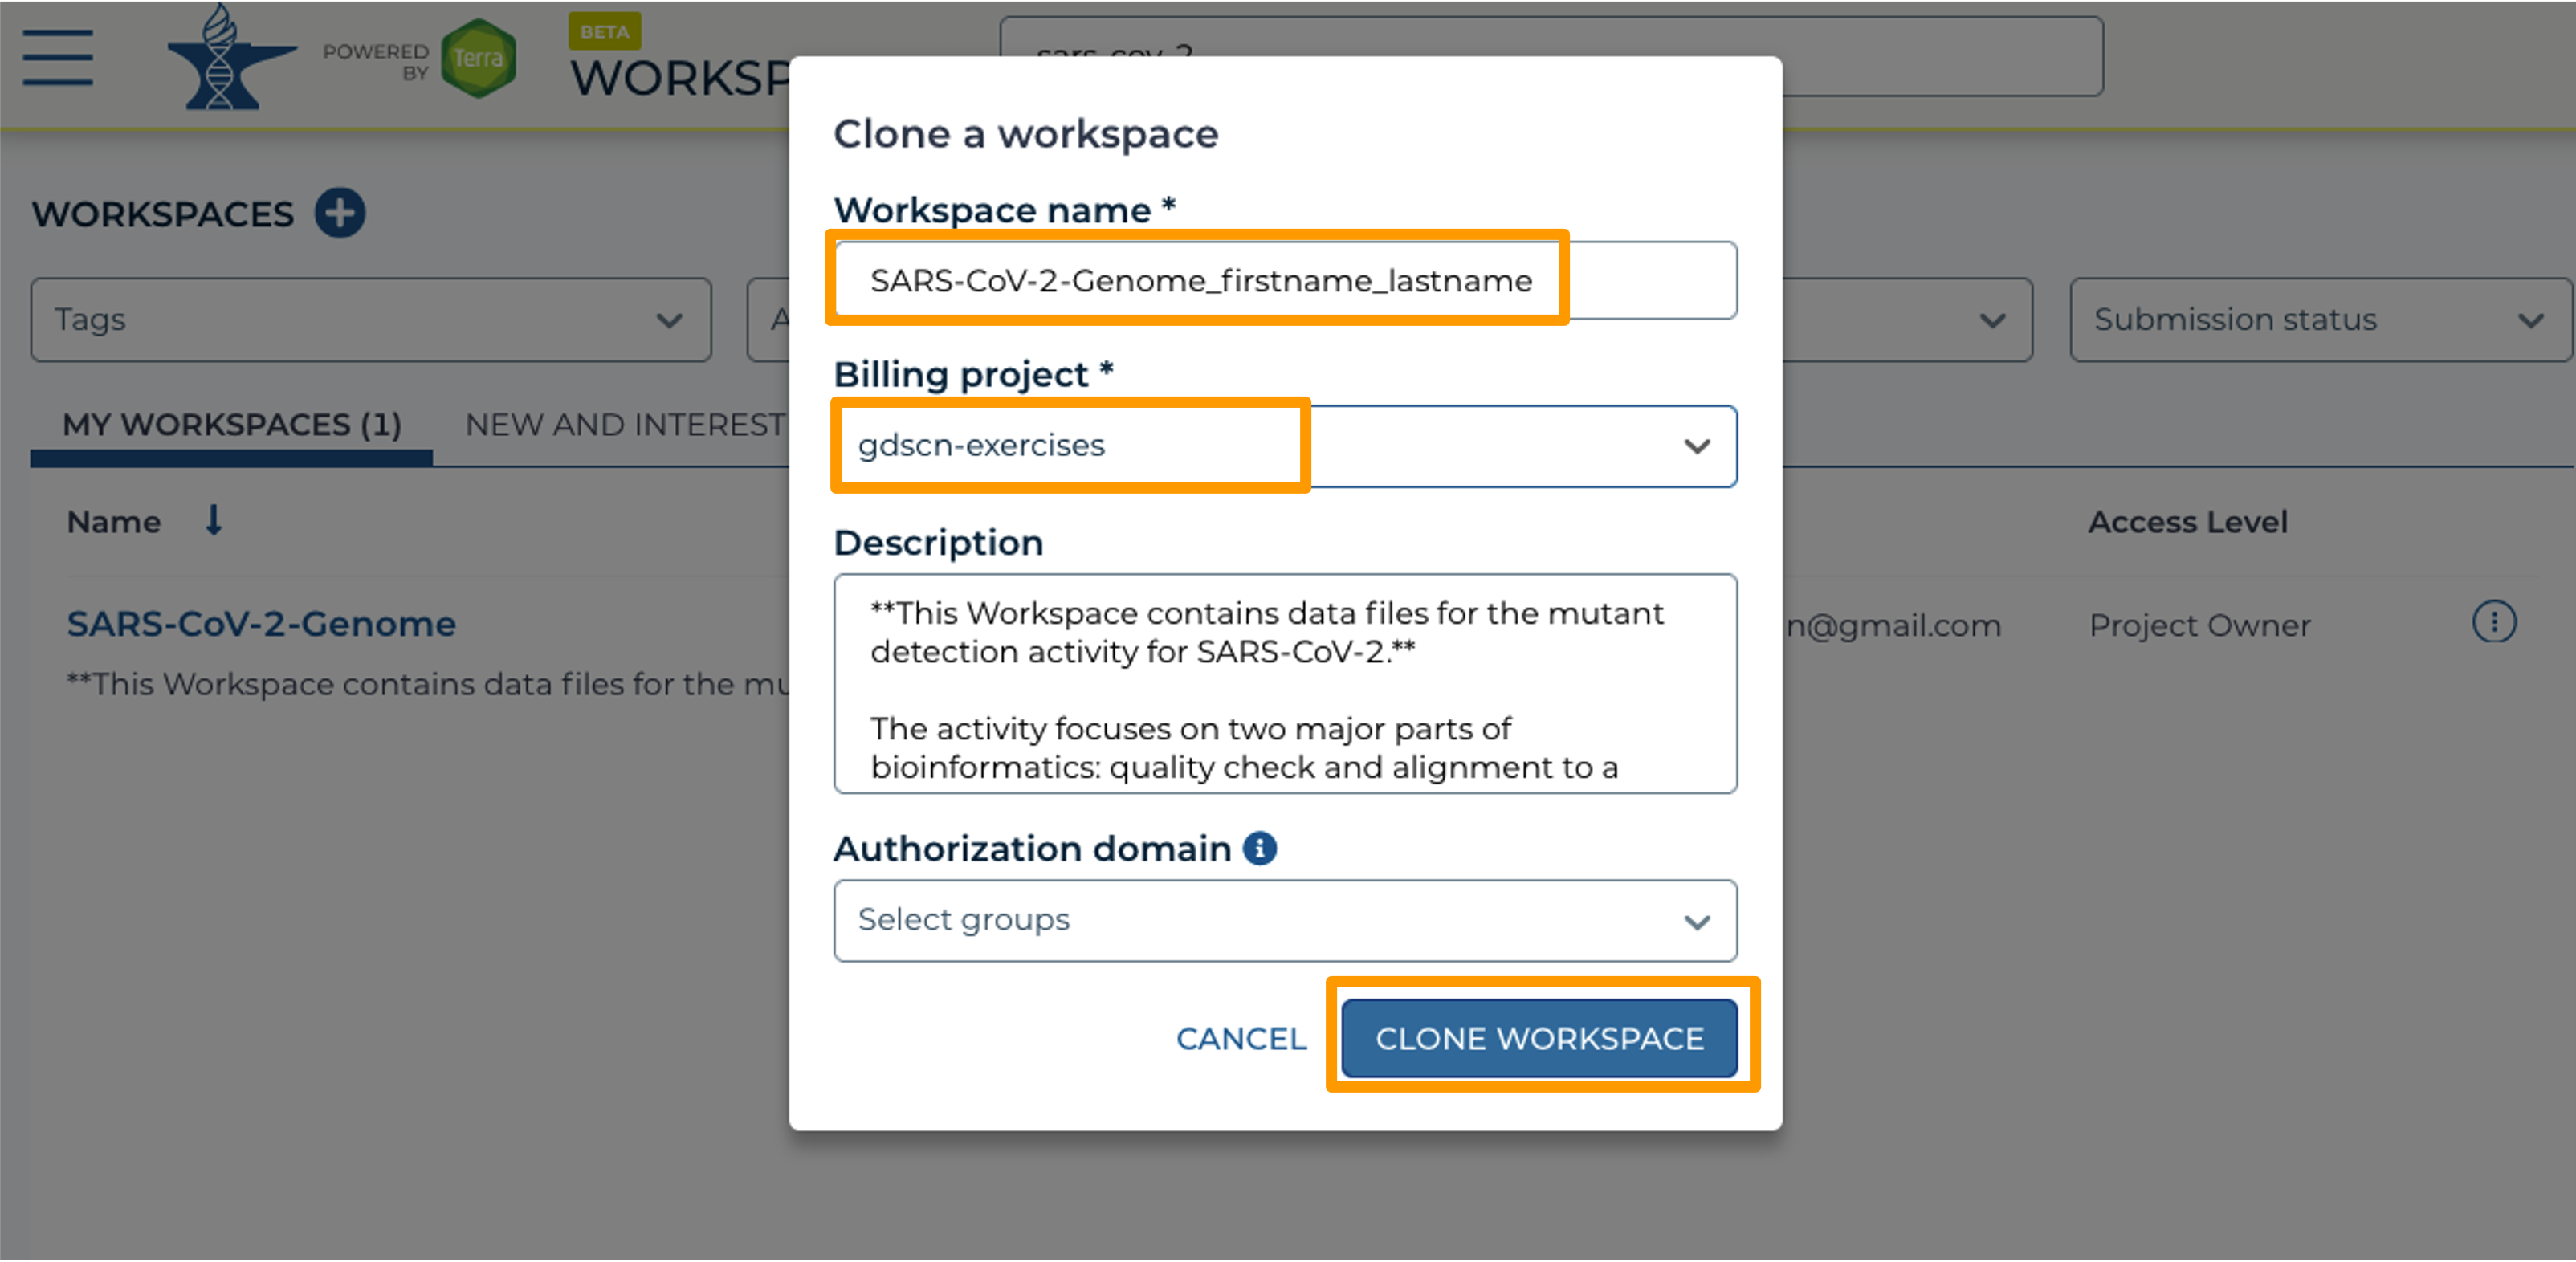 Screenshot showing the "clone a workspace" popout. The Workspace name, Billing Project, and Clone Workspace button have been filled in and highlighted.